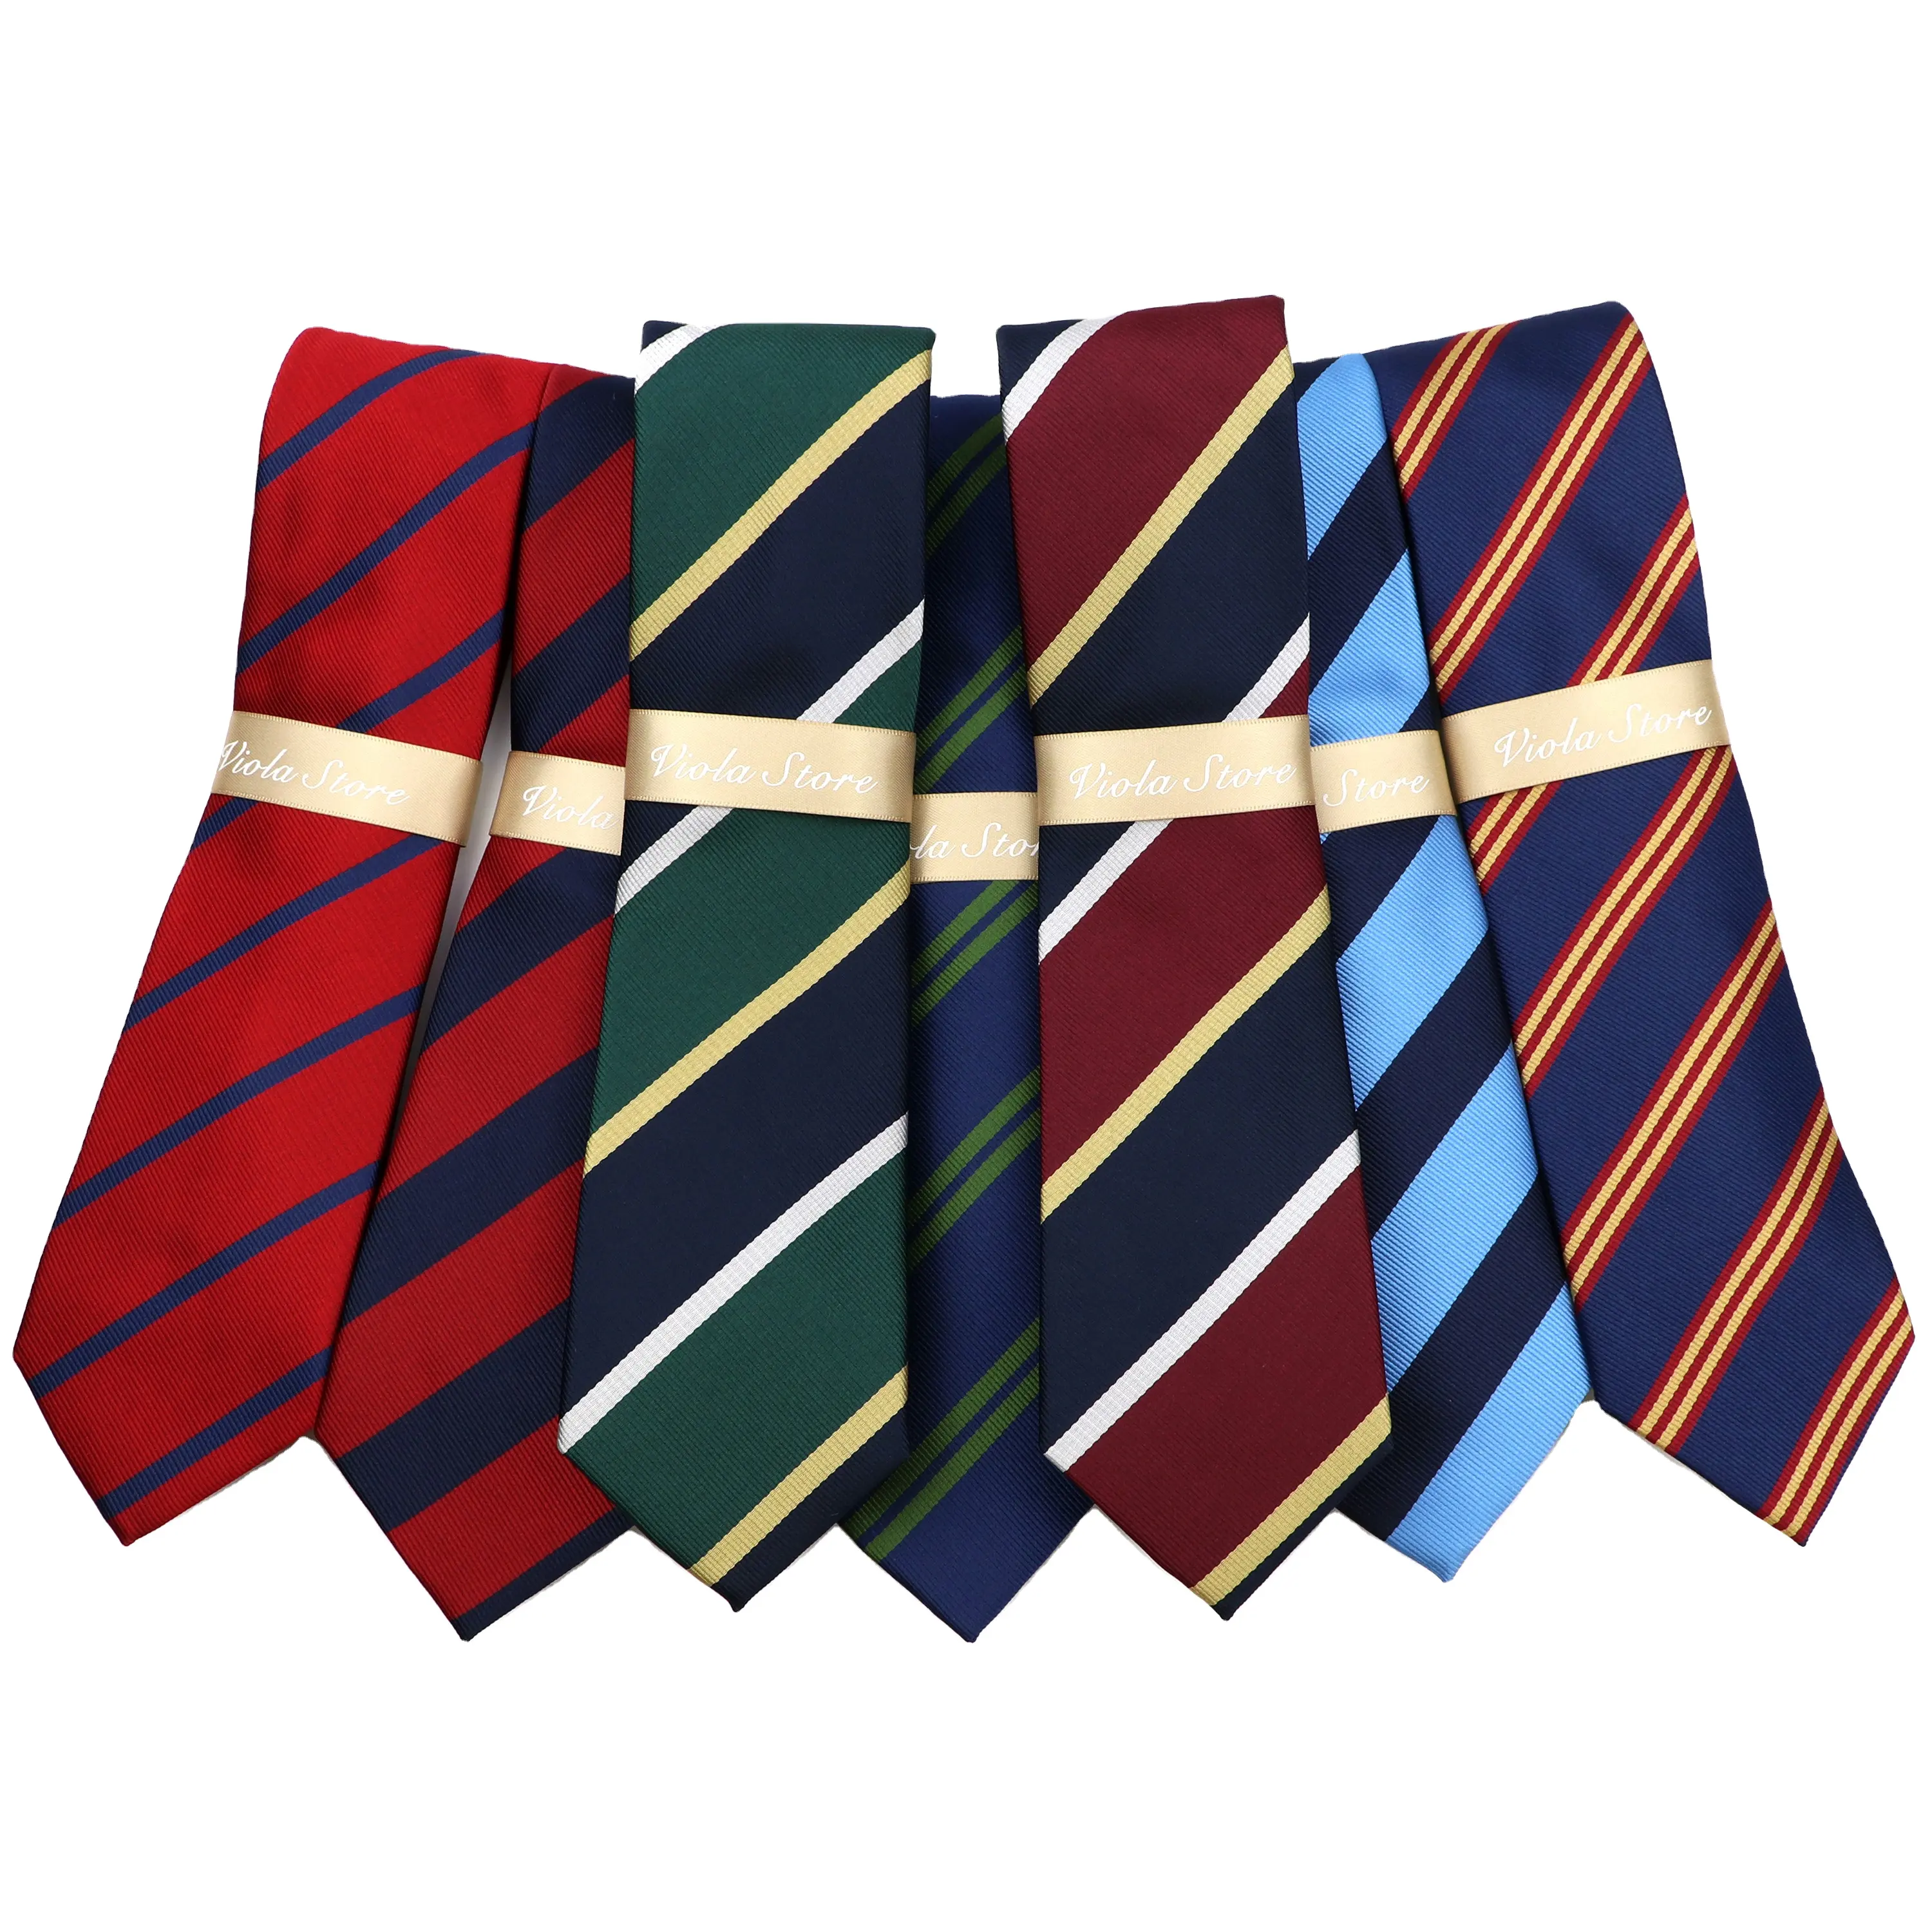 29 Colors Striped Tie 7.5cm Polyester Young Men Red Blue Green Navy Necktie Suit Casual Formal Daily Cravat Quality Accessory